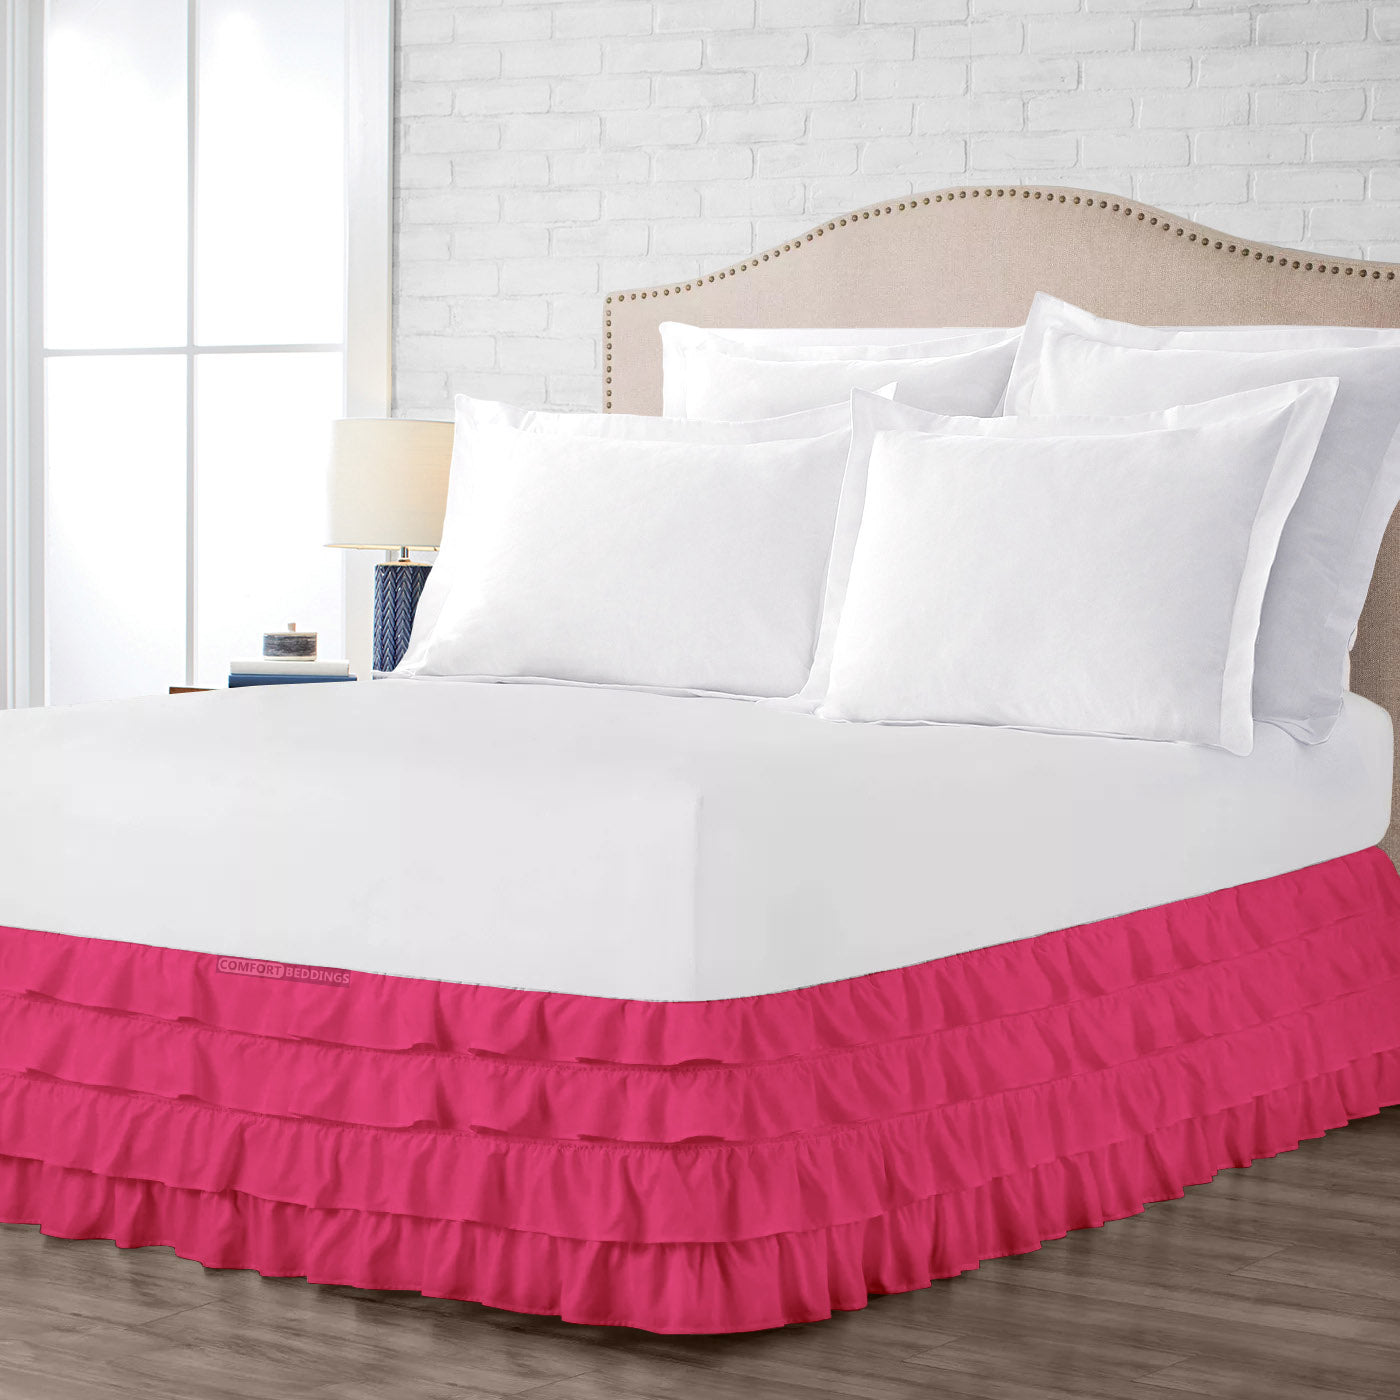 Most Selling Hot Pink Waterfall Ruffled Bed Skirt